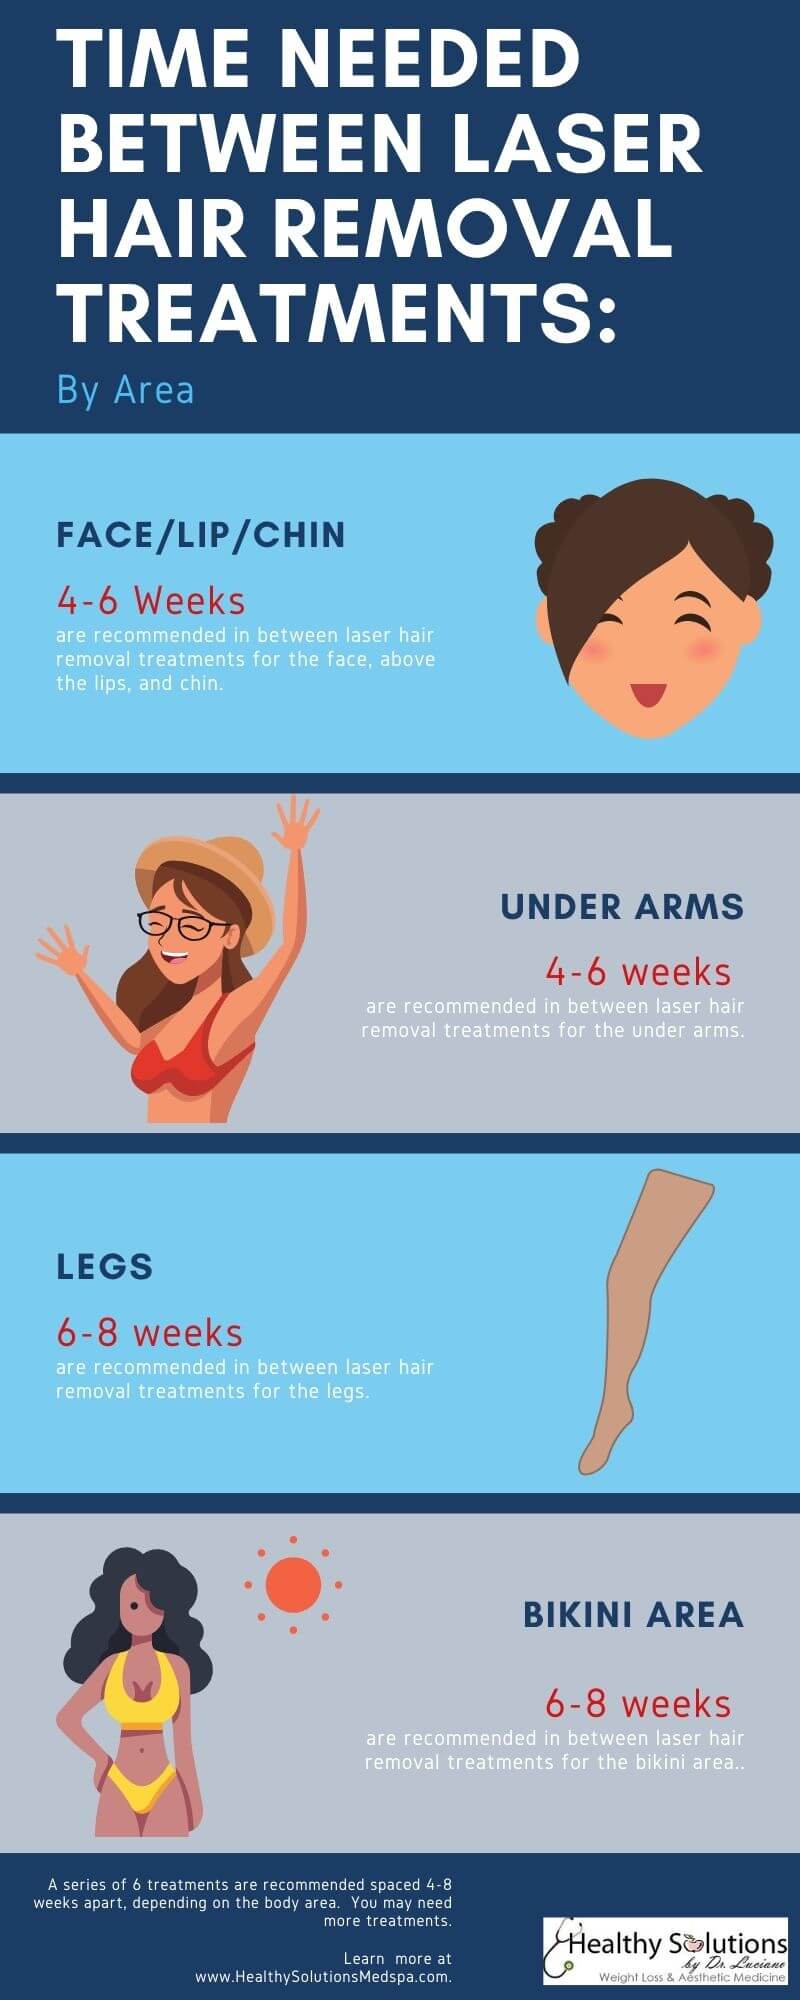 Laser Hair Removal – 9 Most Frequently Asked Questions